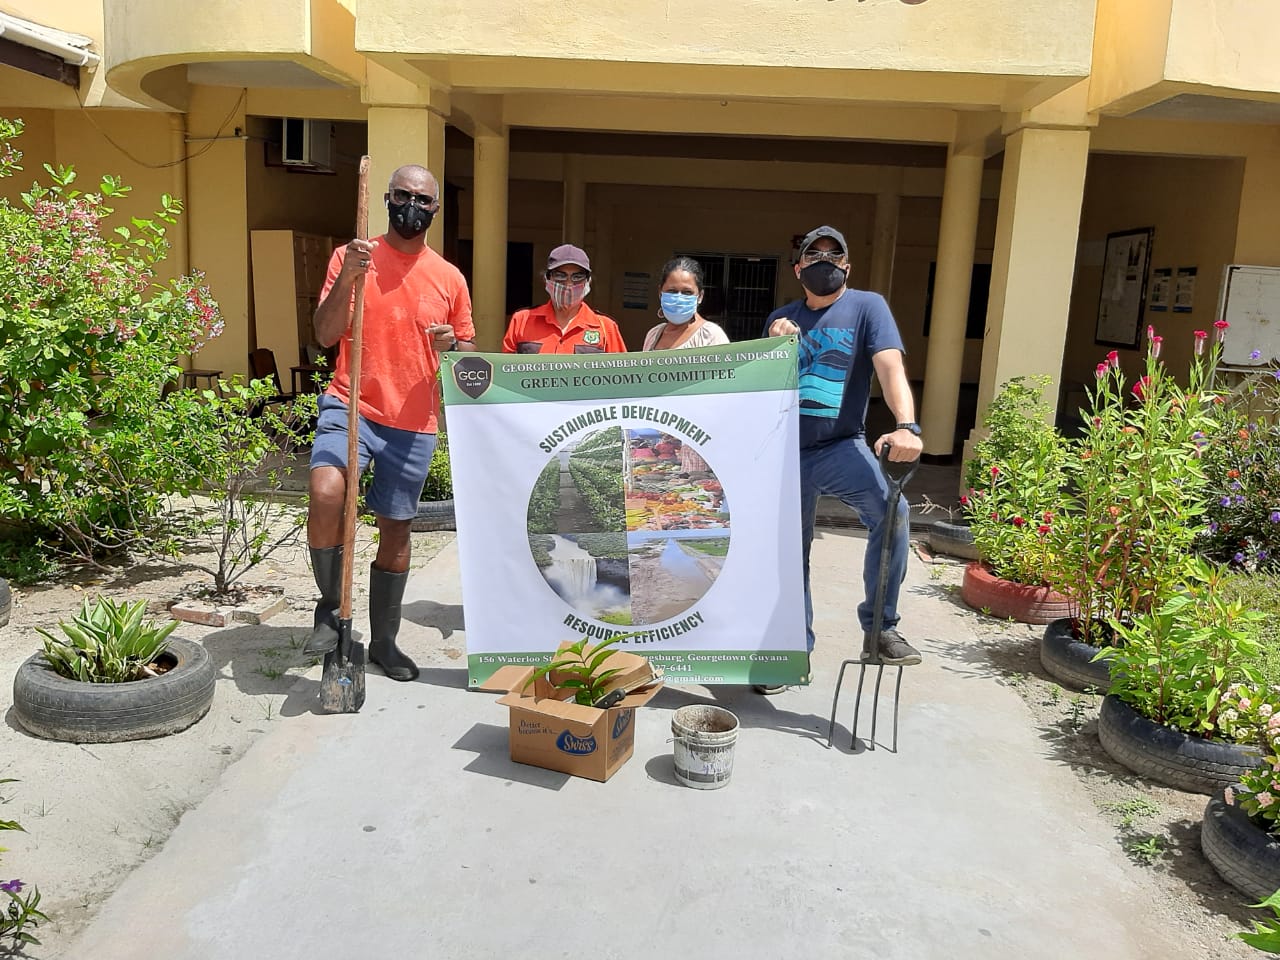 GCCI Commemorates Agriculture Month with its “Plant a Tree” Initiative – Phase II